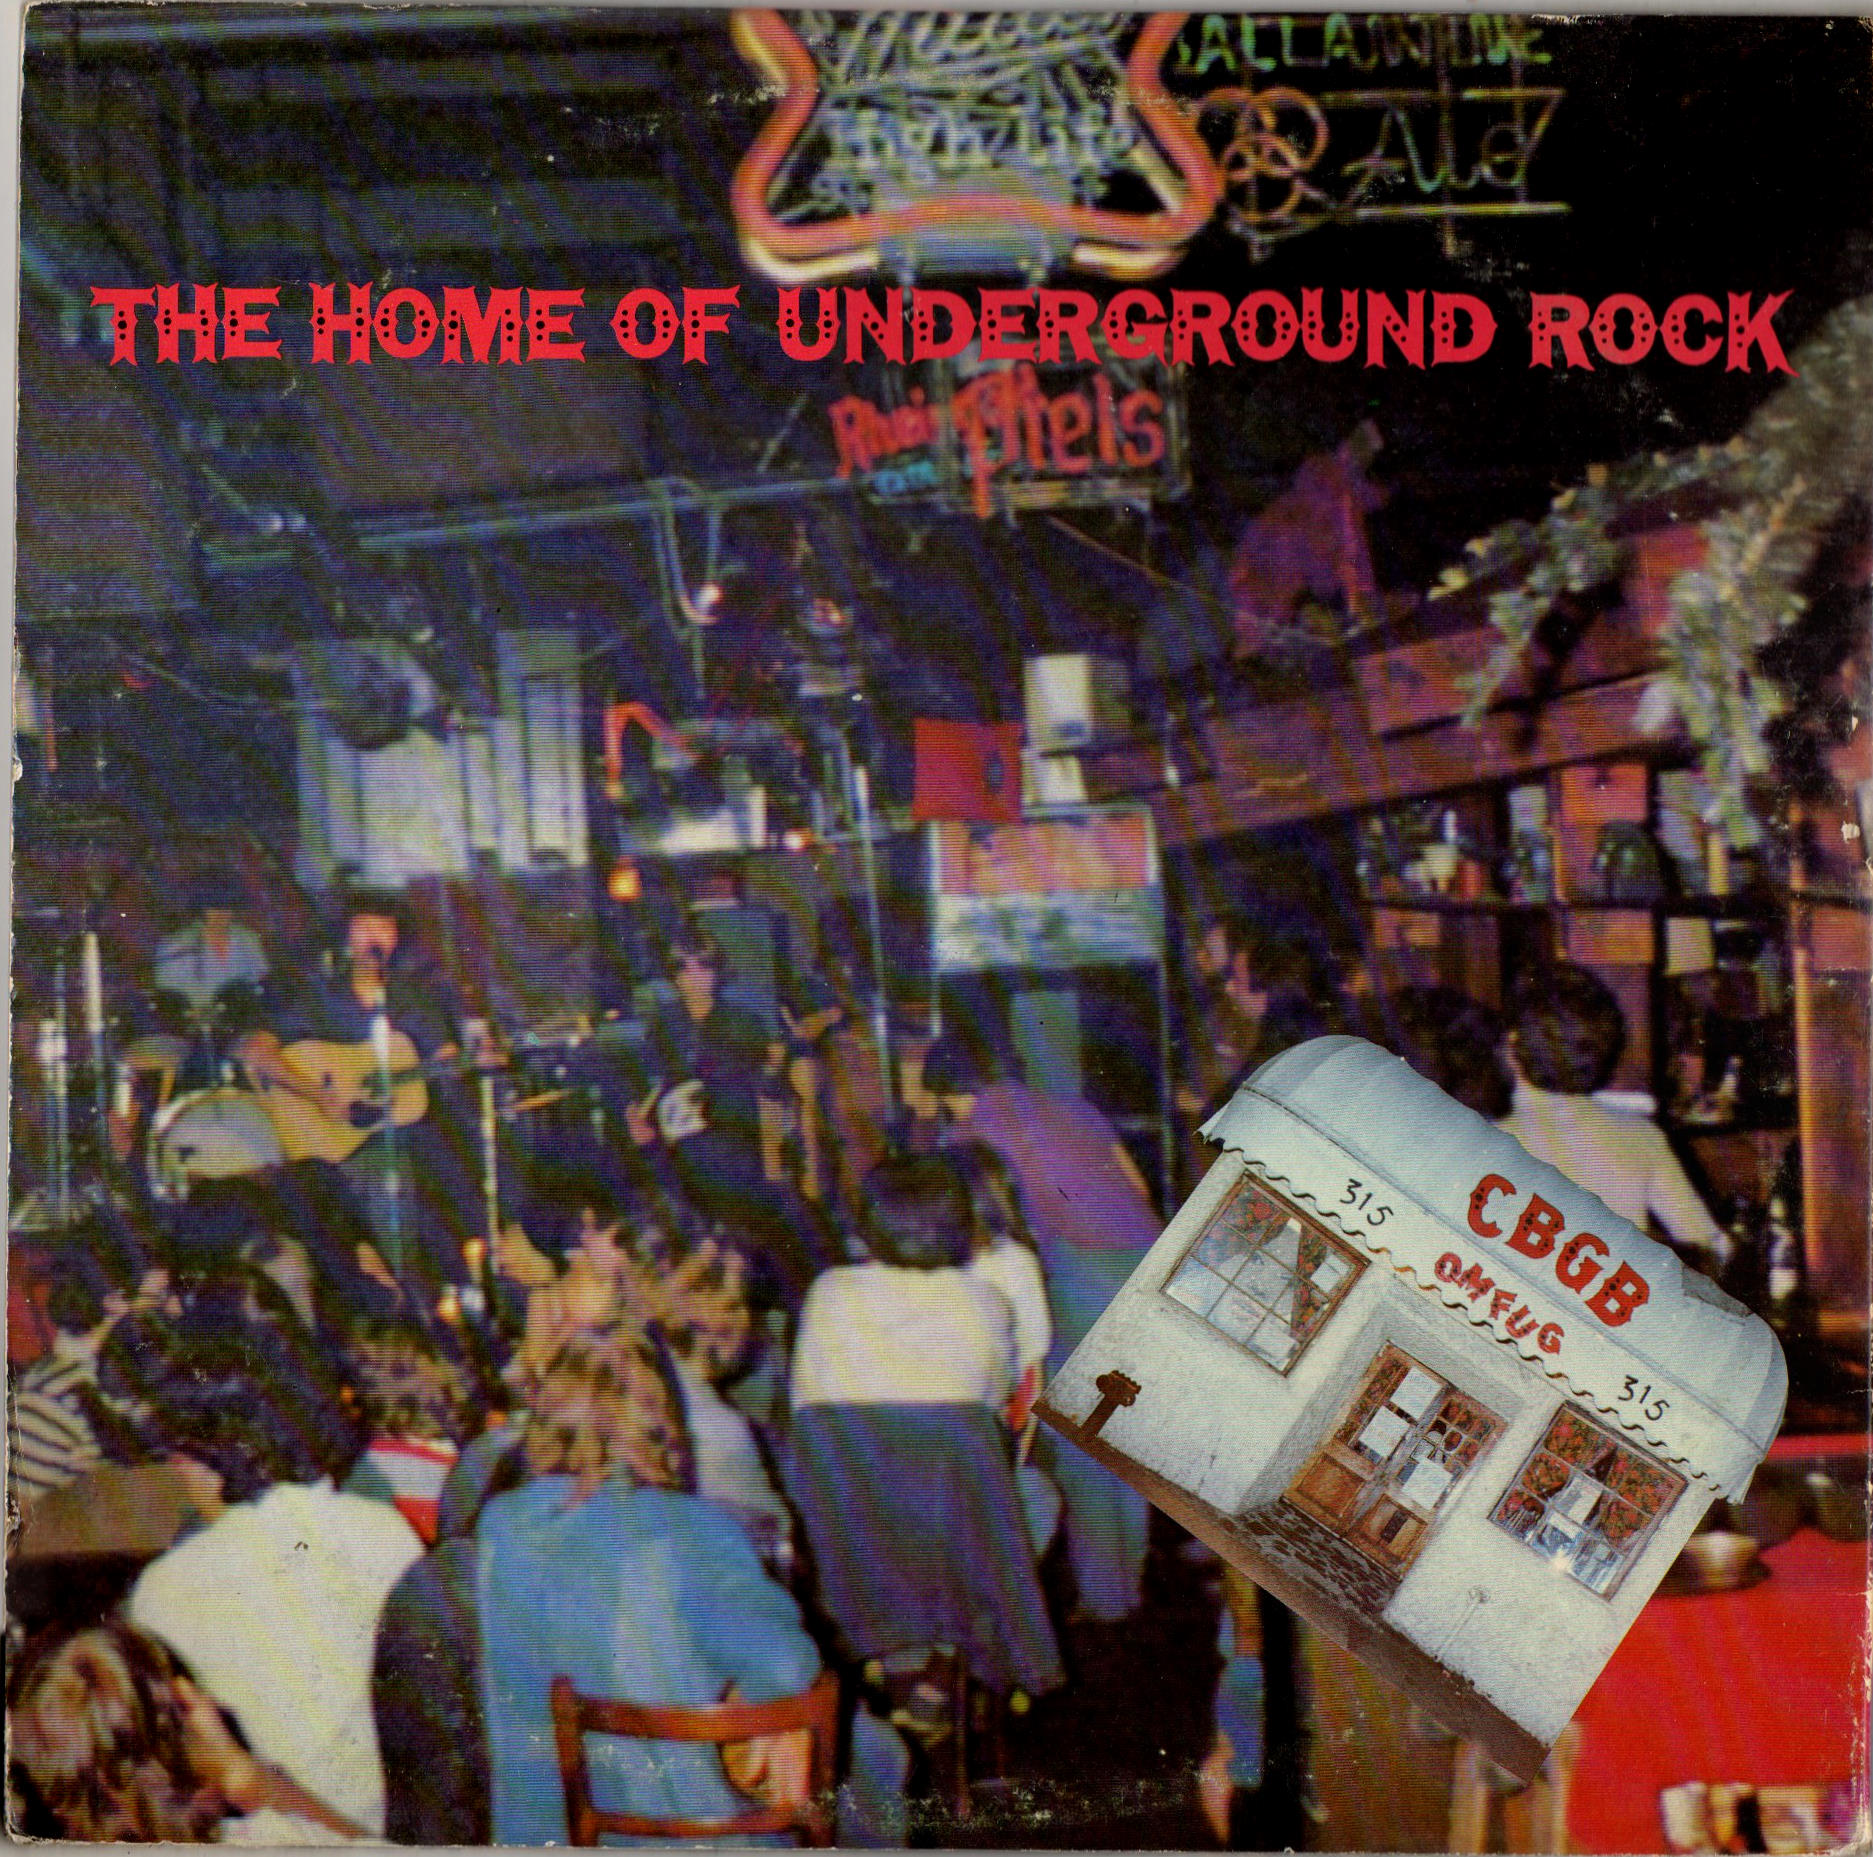 Live At CBGB's Double LP 1976 Talking Heads on stage